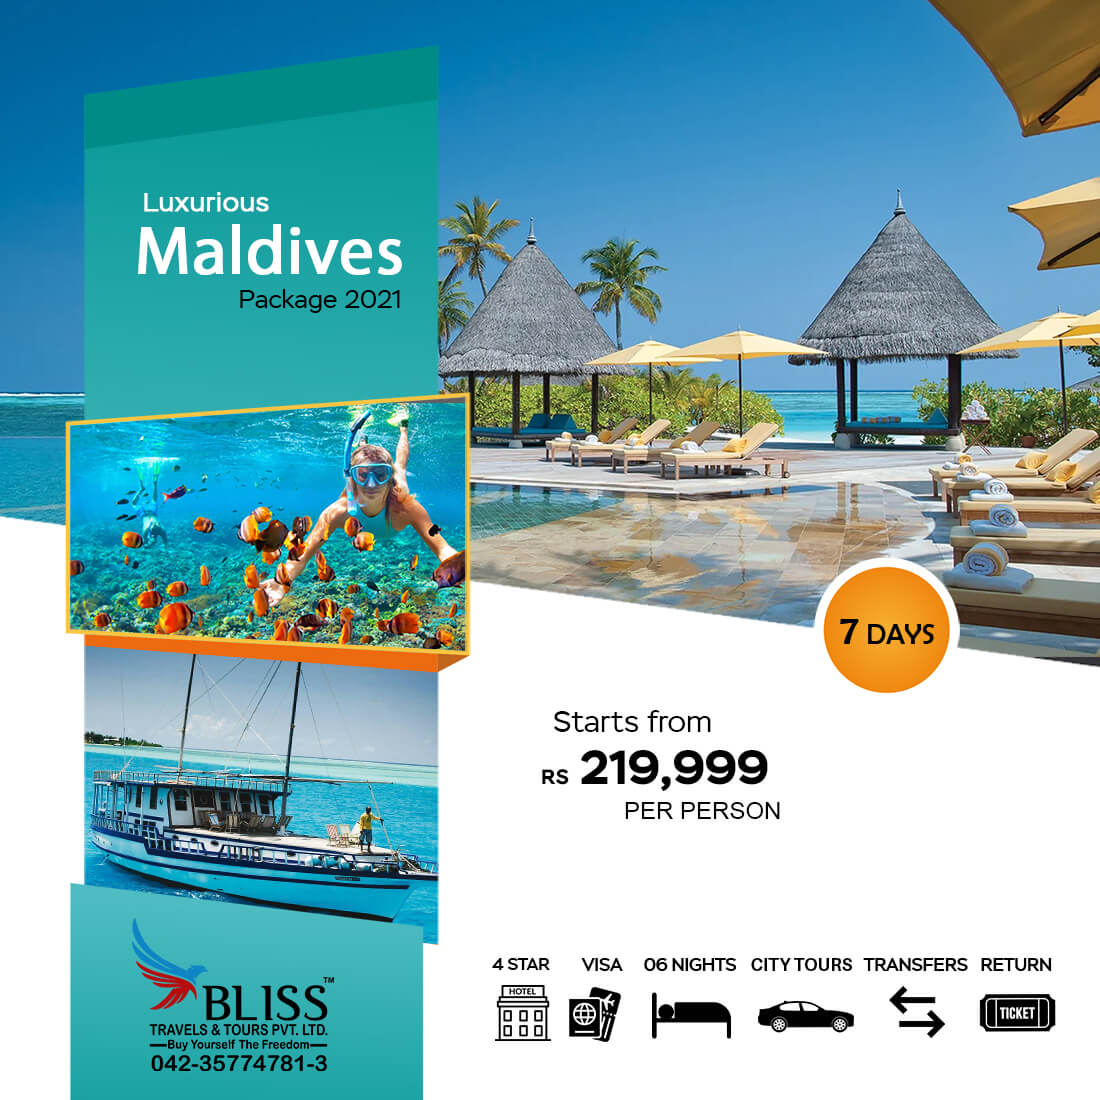 Maldives-Luxurious-Package-2021